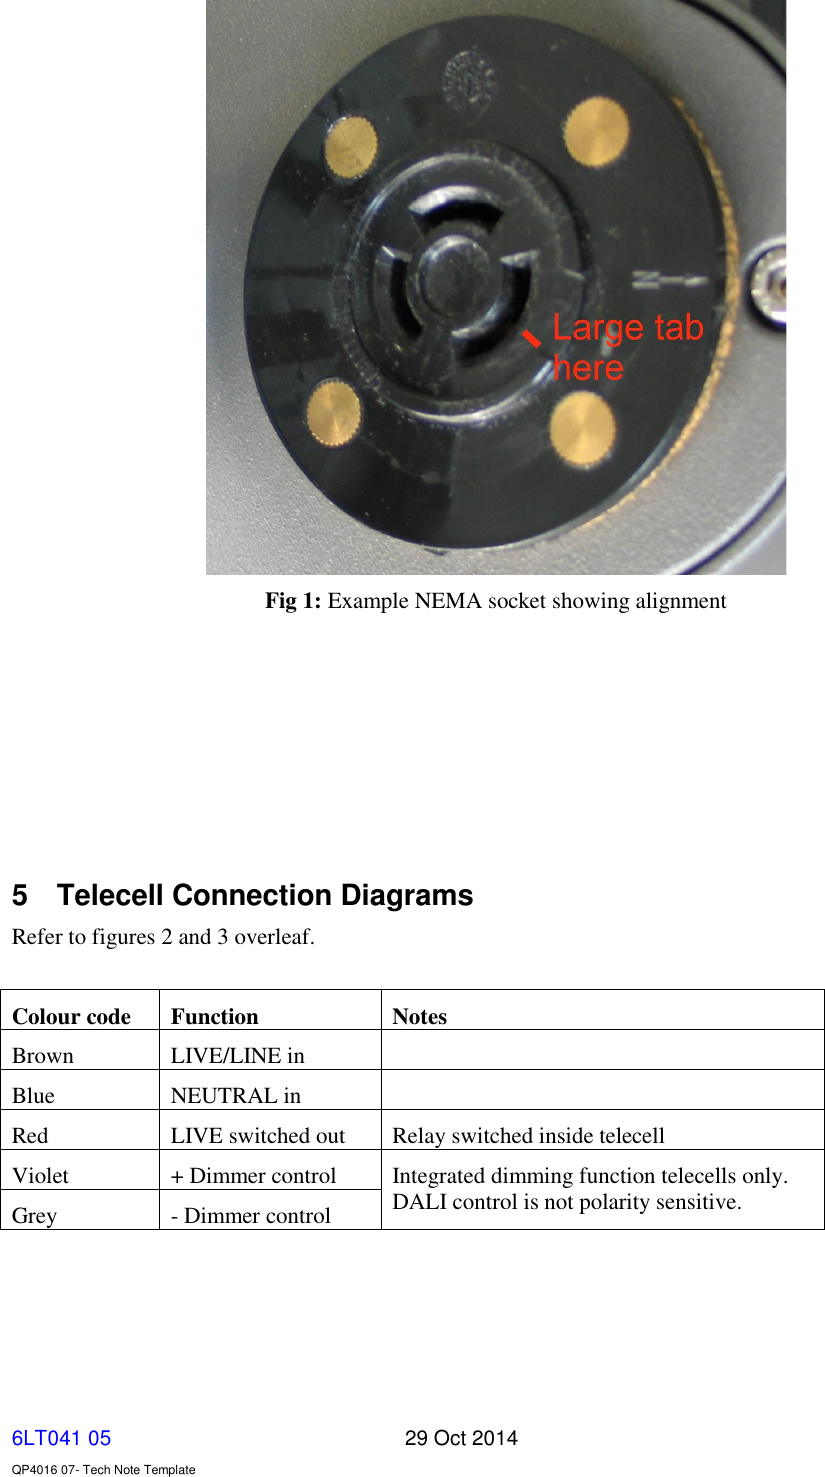   6LT041 05       29 Oct 2014    QP4016 07- Tech Note Template  Fig 1: Example NEMA socket showing alignment        5  Telecell Connection Diagrams Refer to figures 2 and 3 overleaf.  Colour code Function Notes Brown LIVE/LINE in  Blue NEUTRAL in  Red LIVE switched out Relay switched inside telecell Violet + Dimmer control Integrated dimming function telecells only. DALI control is not polarity sensitive. Grey - Dimmer control    